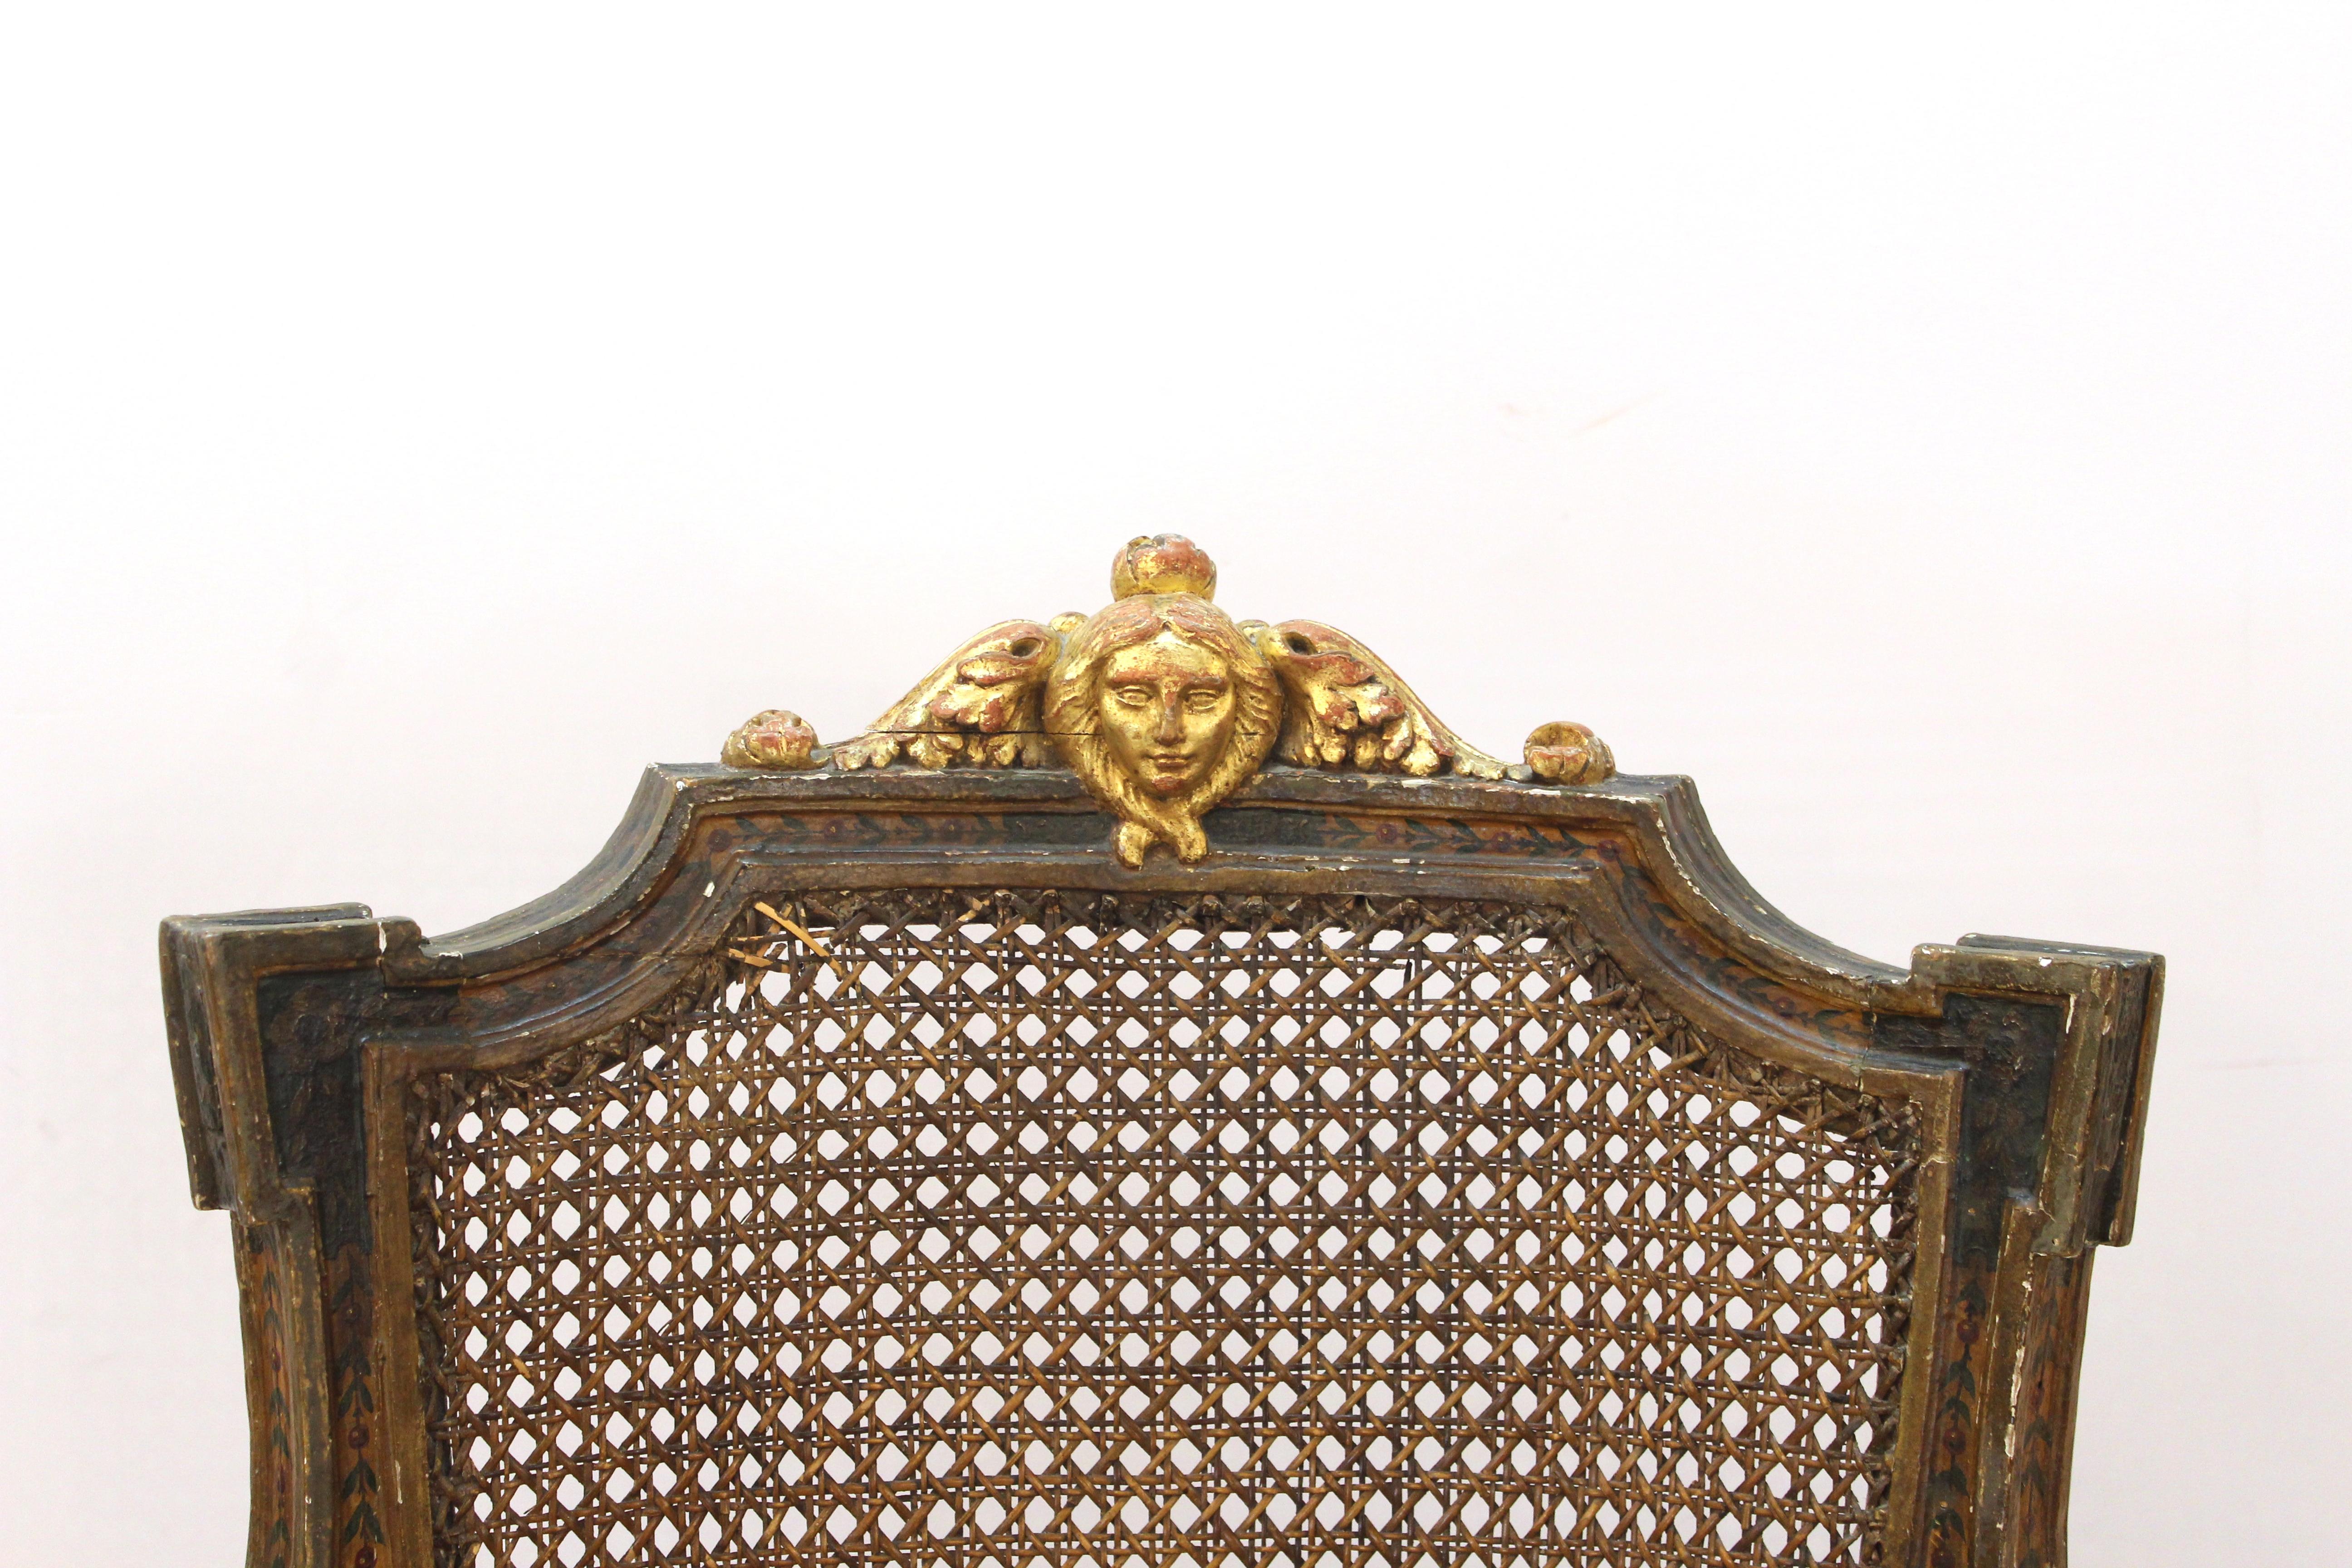 Antique Continental arm chair, likely late 18th century, parcel gilt and paint decorated, masque carved crest, acanthus leaf arms, caned back and seat and with upholstered cushion. 38.5